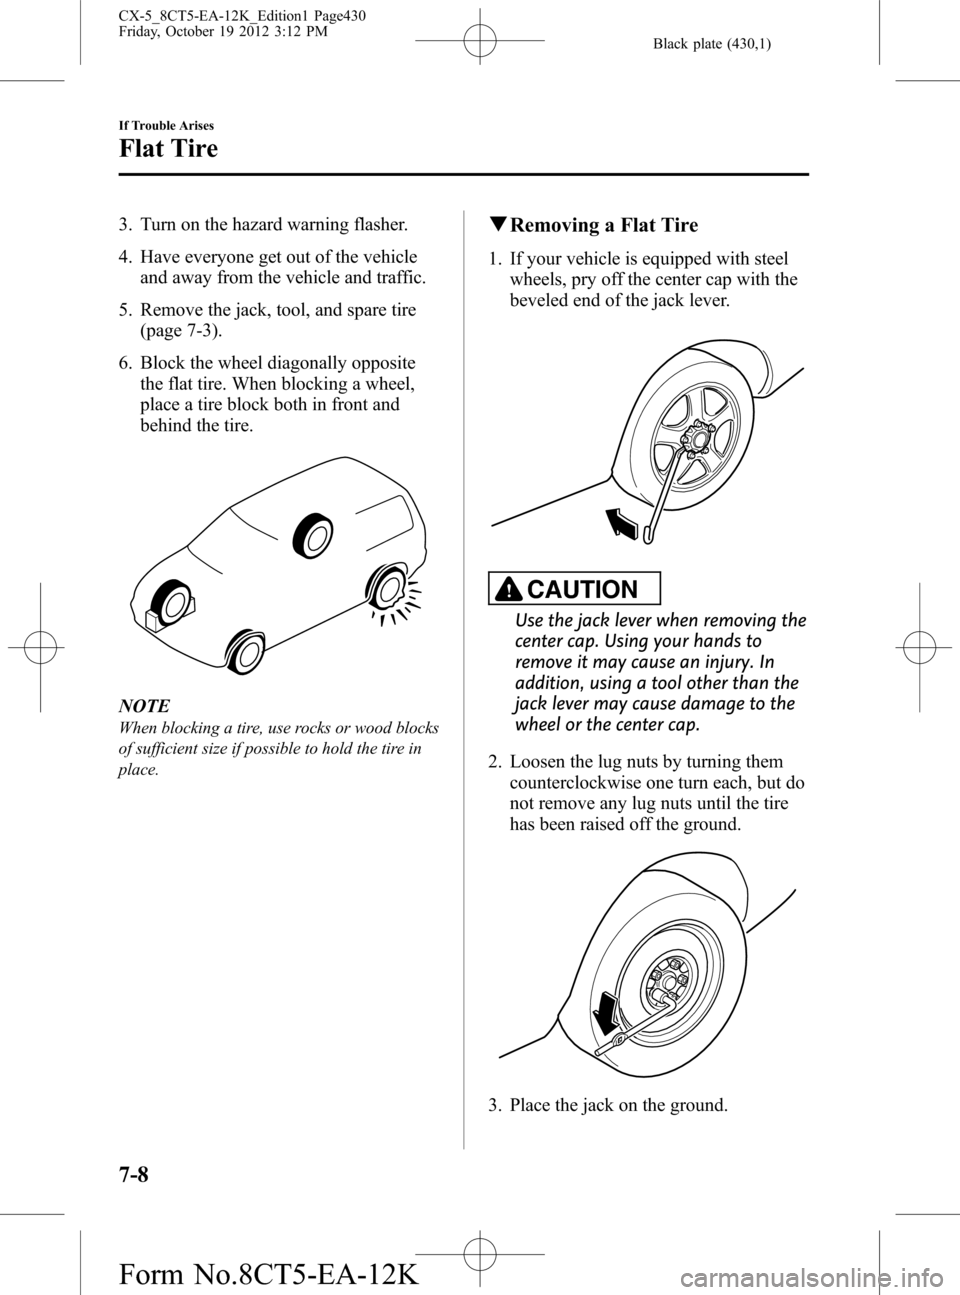 MAZDA MODEL CX-5 2014  Owners Manual (in English) Black plate (430,1)
3. Turn on the hazard warning flasher.
4. Have everyone get out of the vehicle
and away from the vehicle and traffic.
5. Remove the jack, tool, and spare tire
(page 7-3).
6. Block 